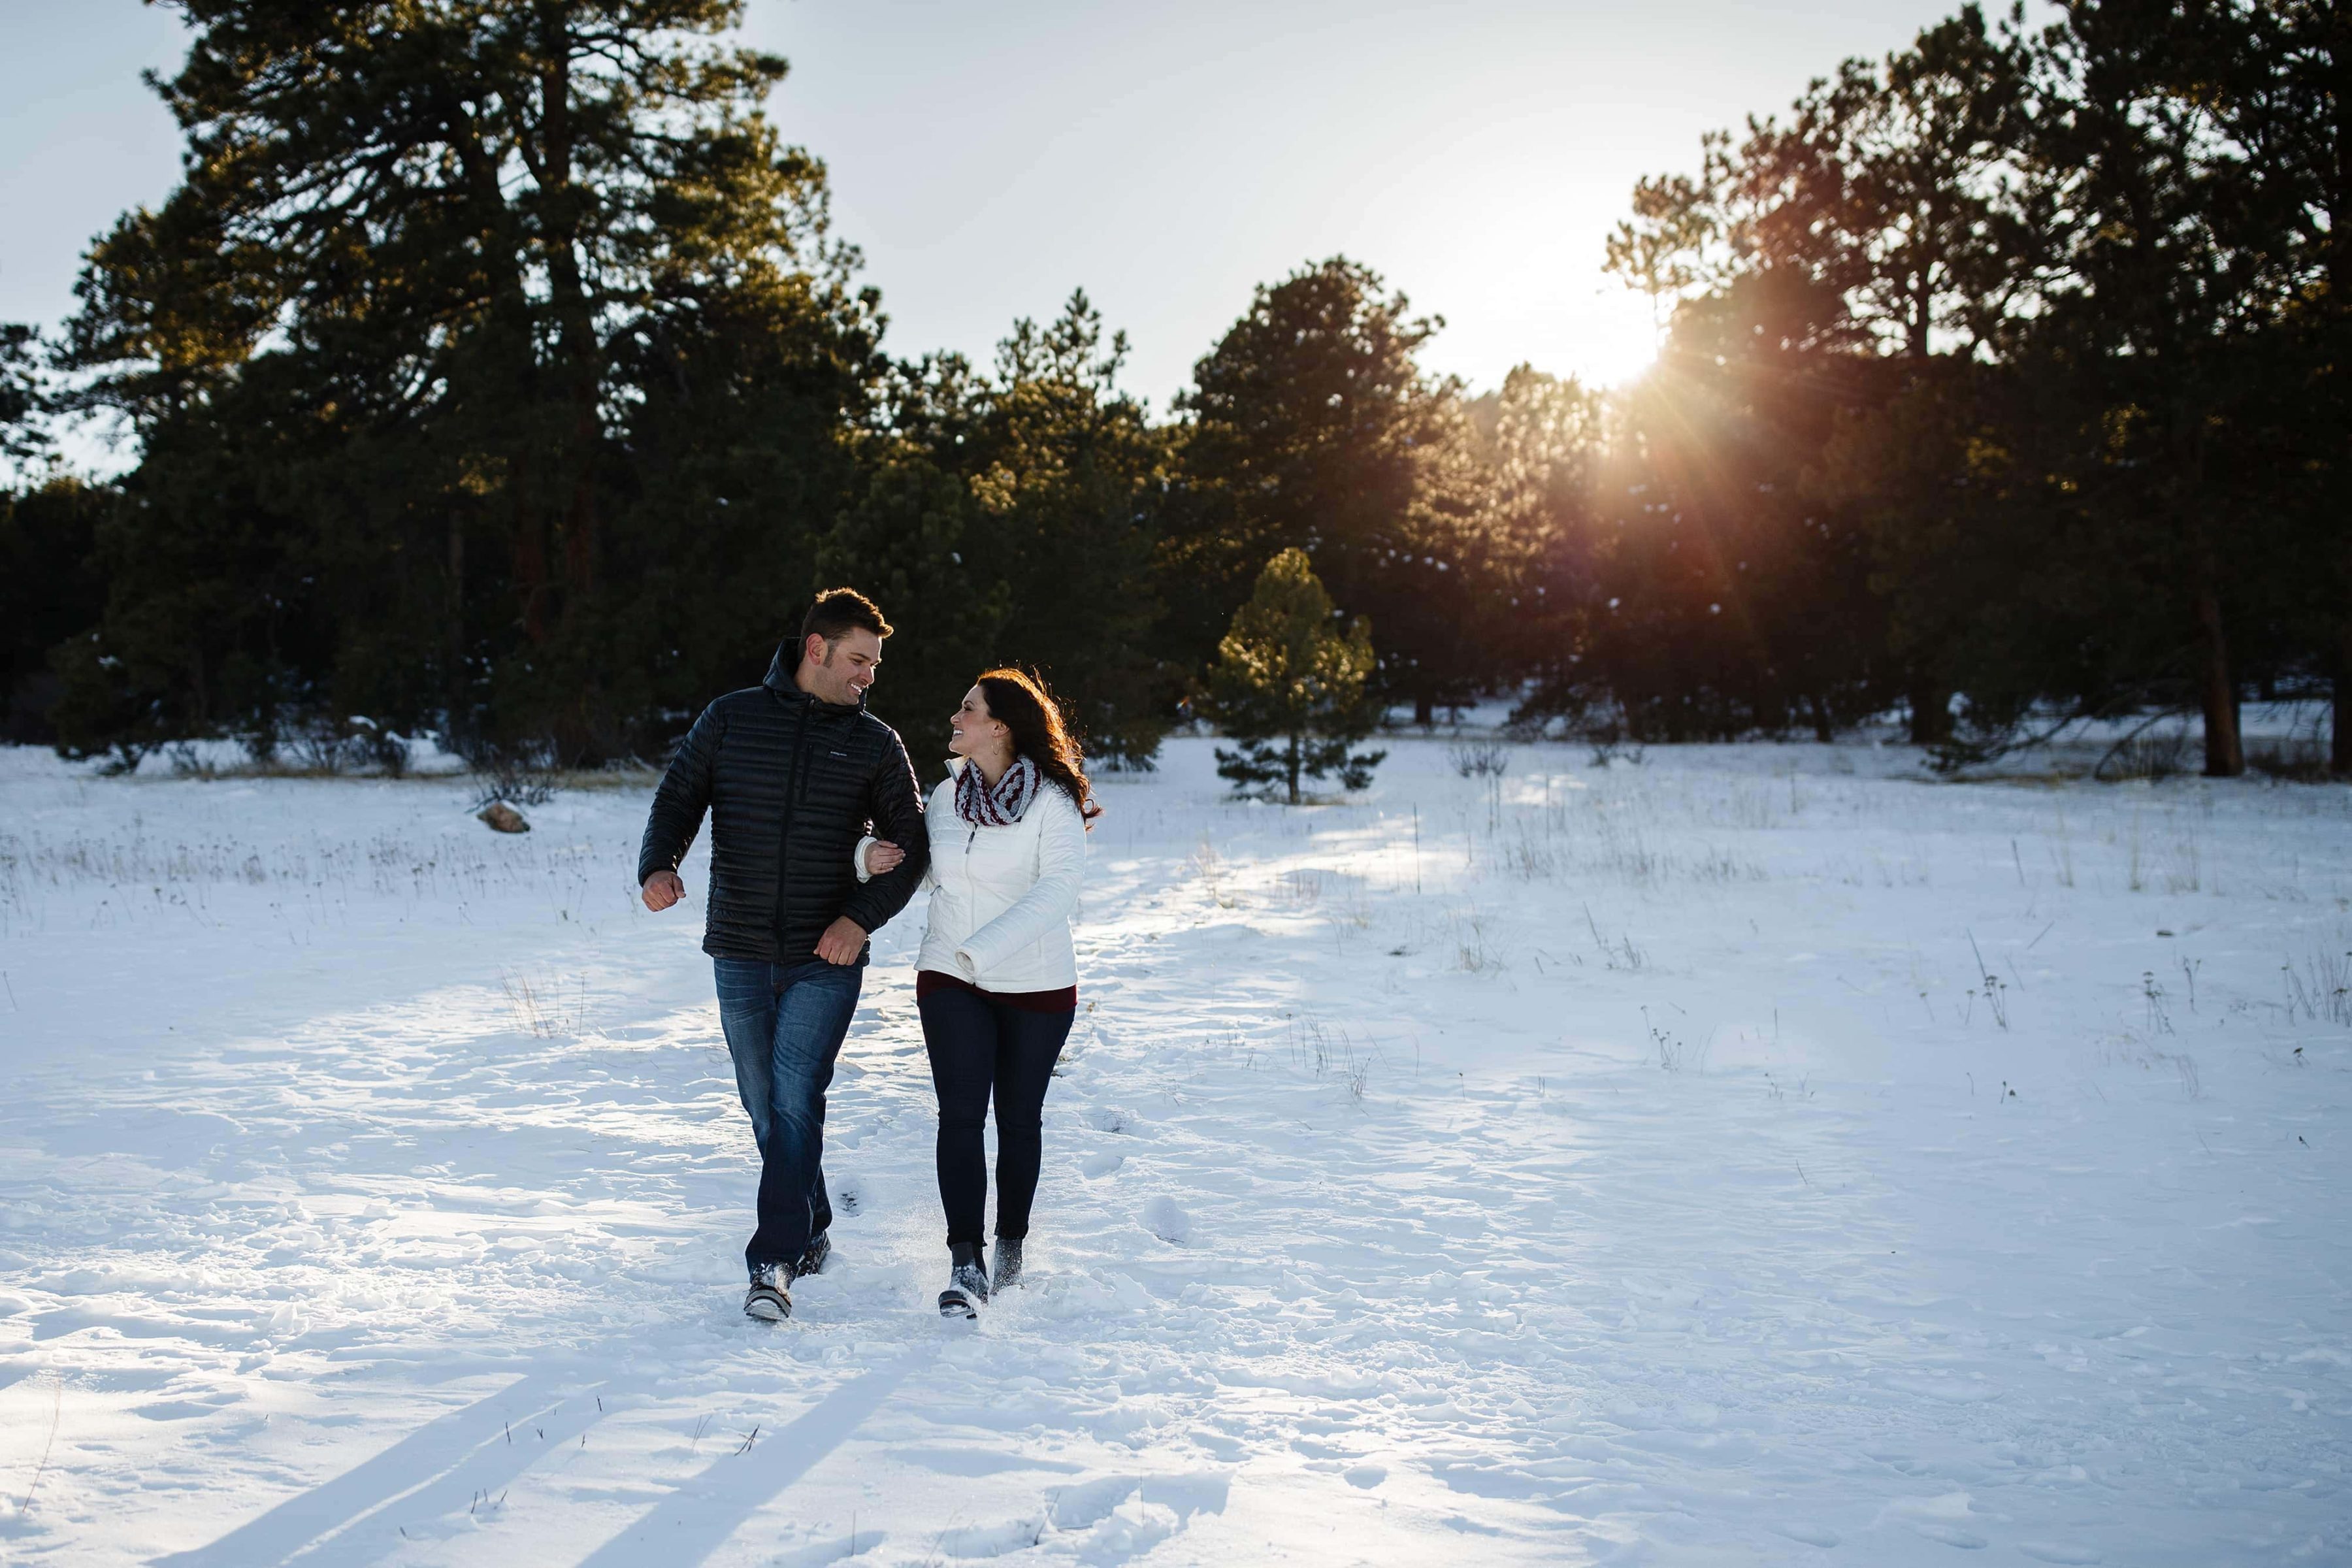 Melissa and Jordan walk through the snow during their winter Elk Meadow Park engagement session near Evergreen, Colorado